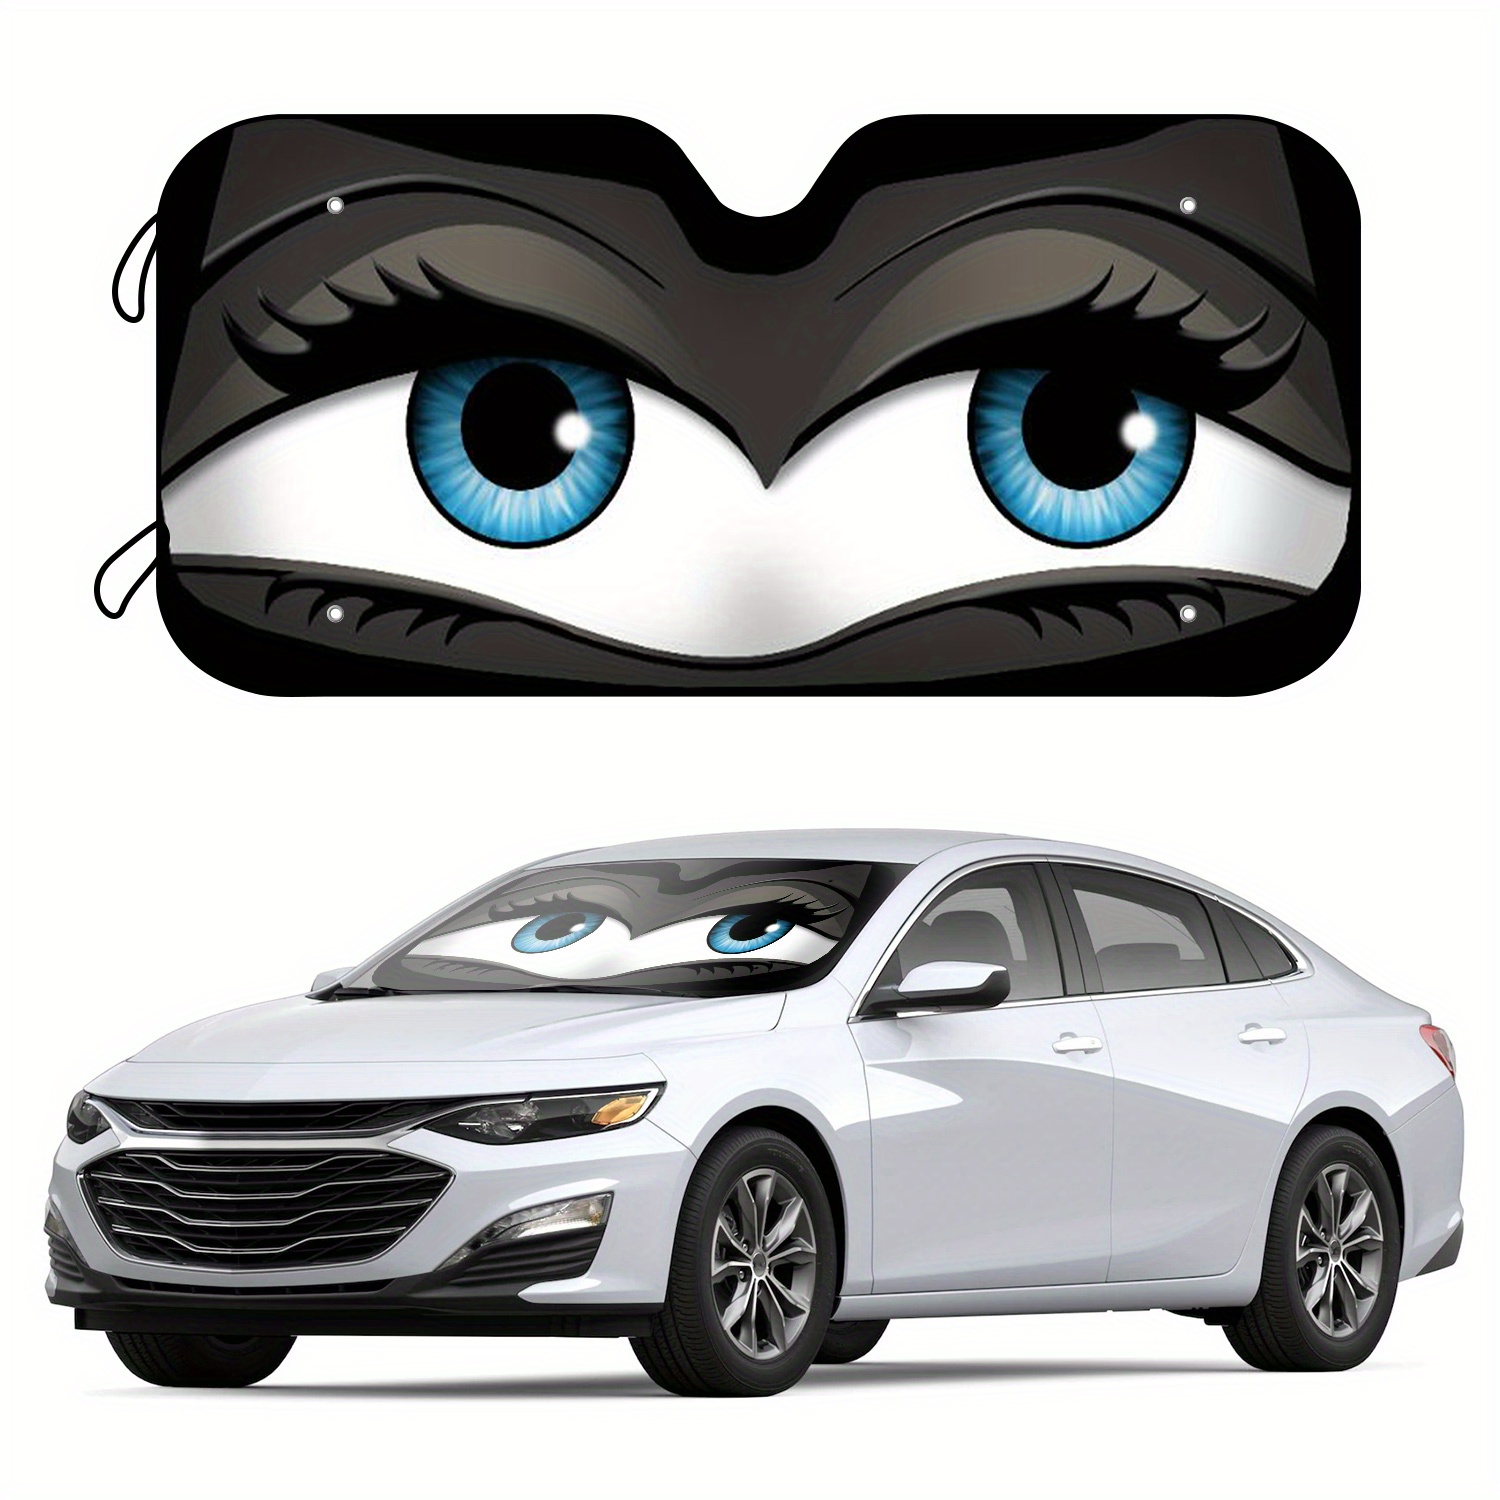 

Cartoon Eyes Front Windshield Sun Shade Visor For Cars - Uv Protection, Heat Reduction, Universal Fit With 4 Suction Cups